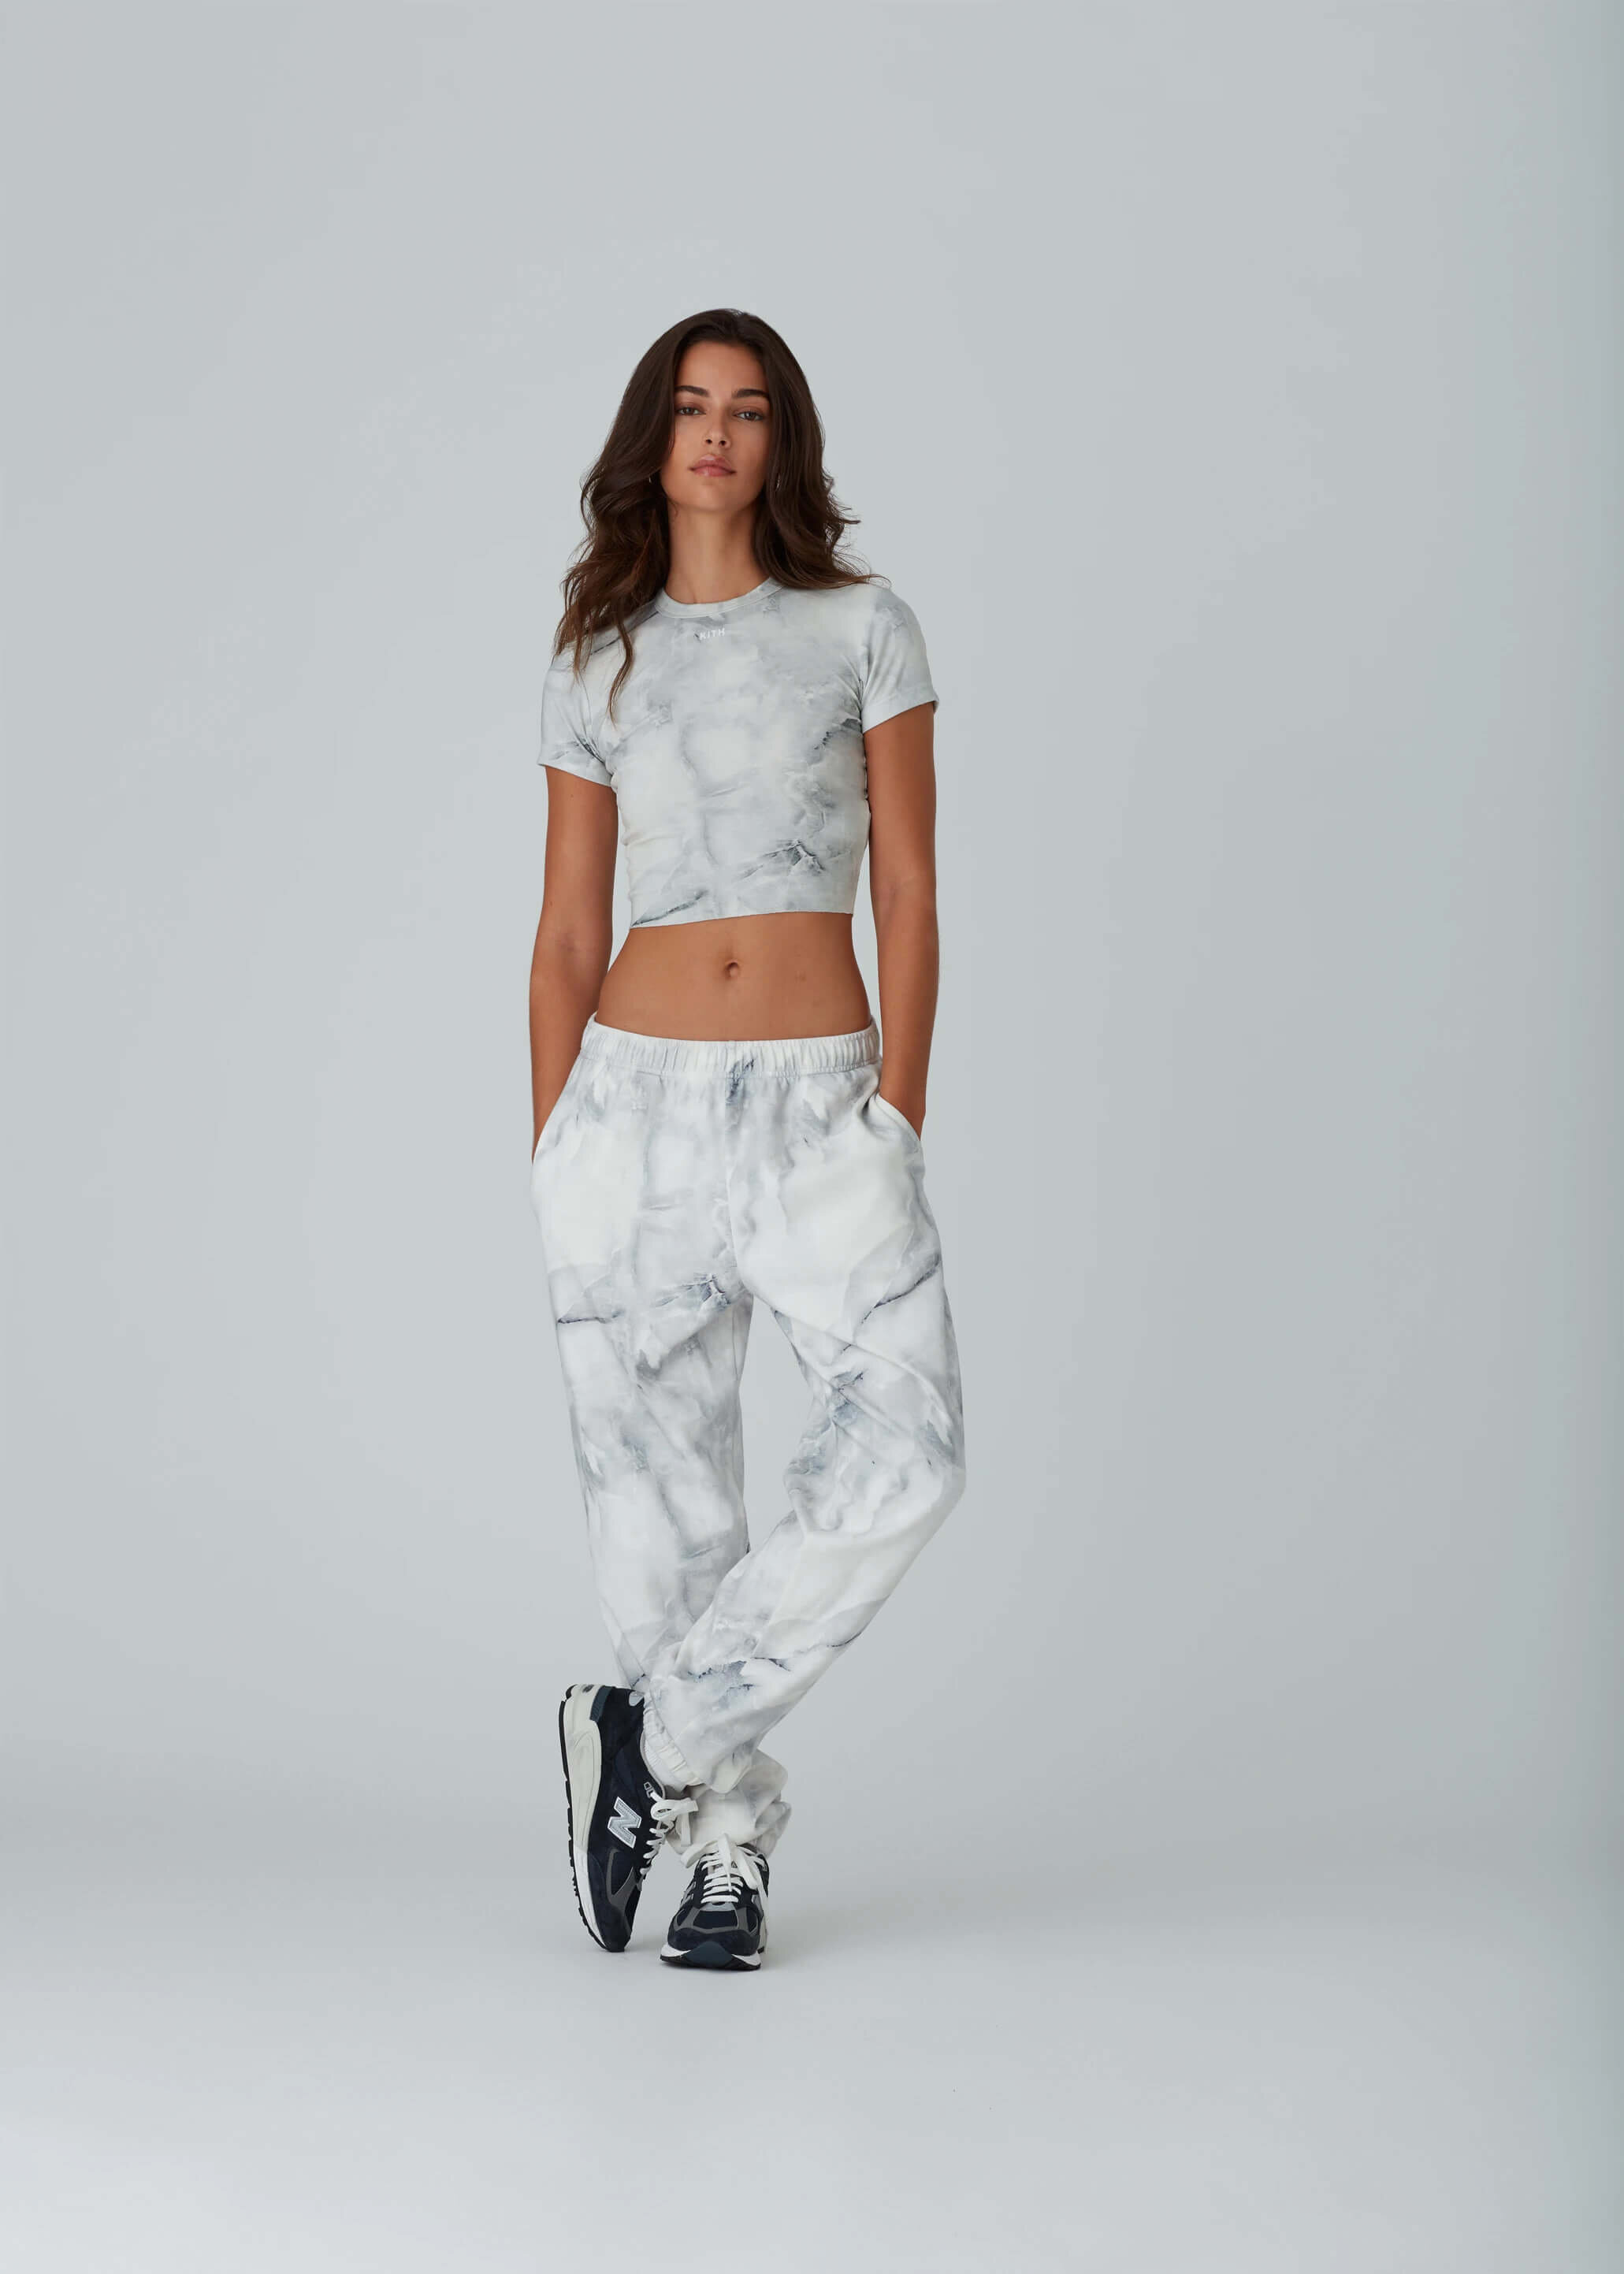 CNK-Kith-Spring-1-2021-Collection-Look-6.jpeg